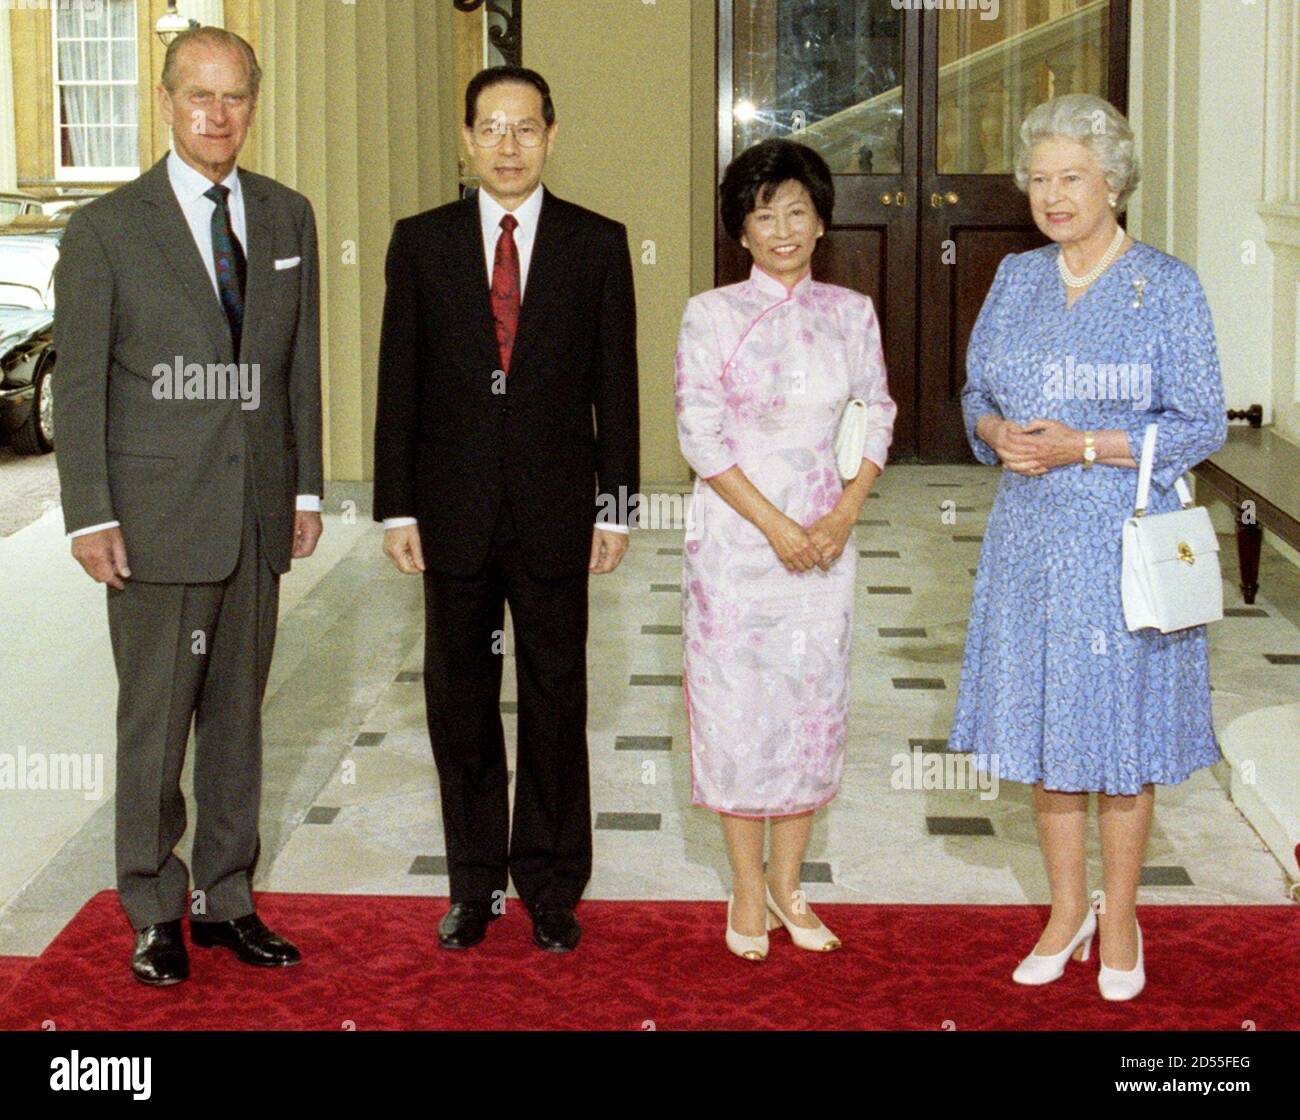 The Duke of Edinburgh (L) and the Queen (R) greet the President of Singapore Ong Teng Cheong and his wife Mrs Cheong on their arrival at Buckingham Palace July 7. The President is on a five day official visit to Britain.  KD Stock Photo